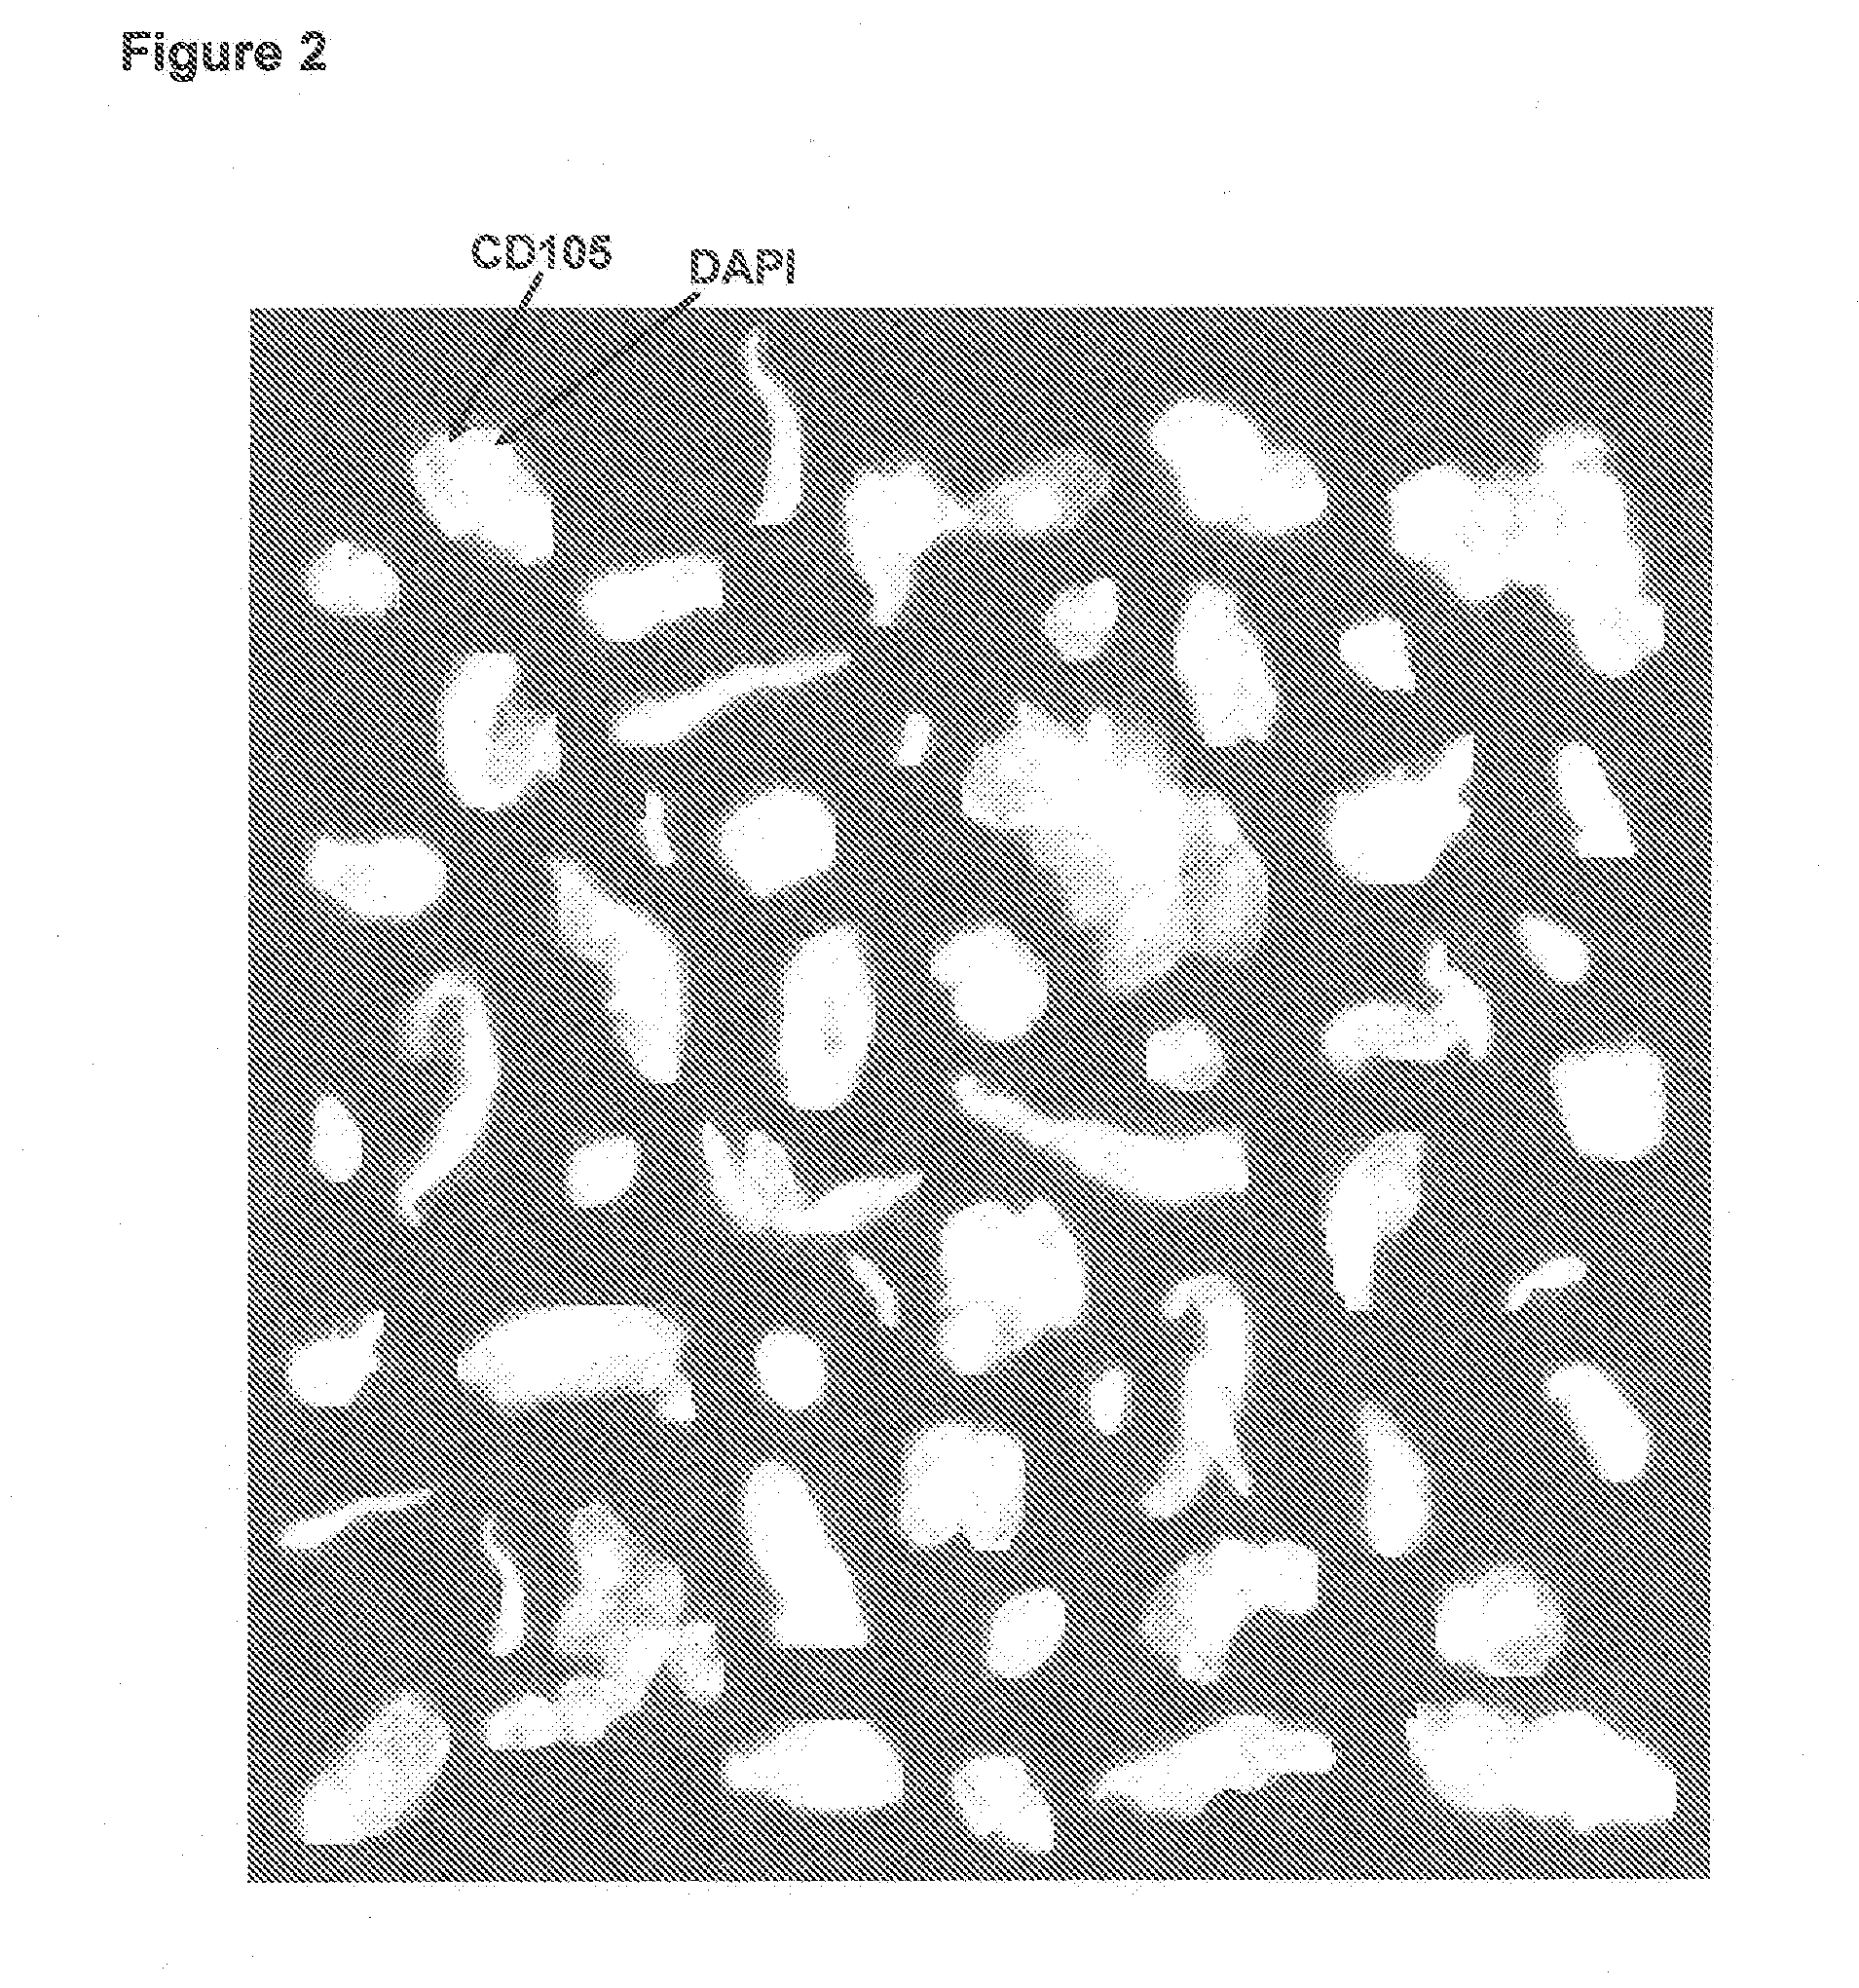 Method of assessing metastatic carcinomas from circulating endothelial cells and disseminated tumor cells